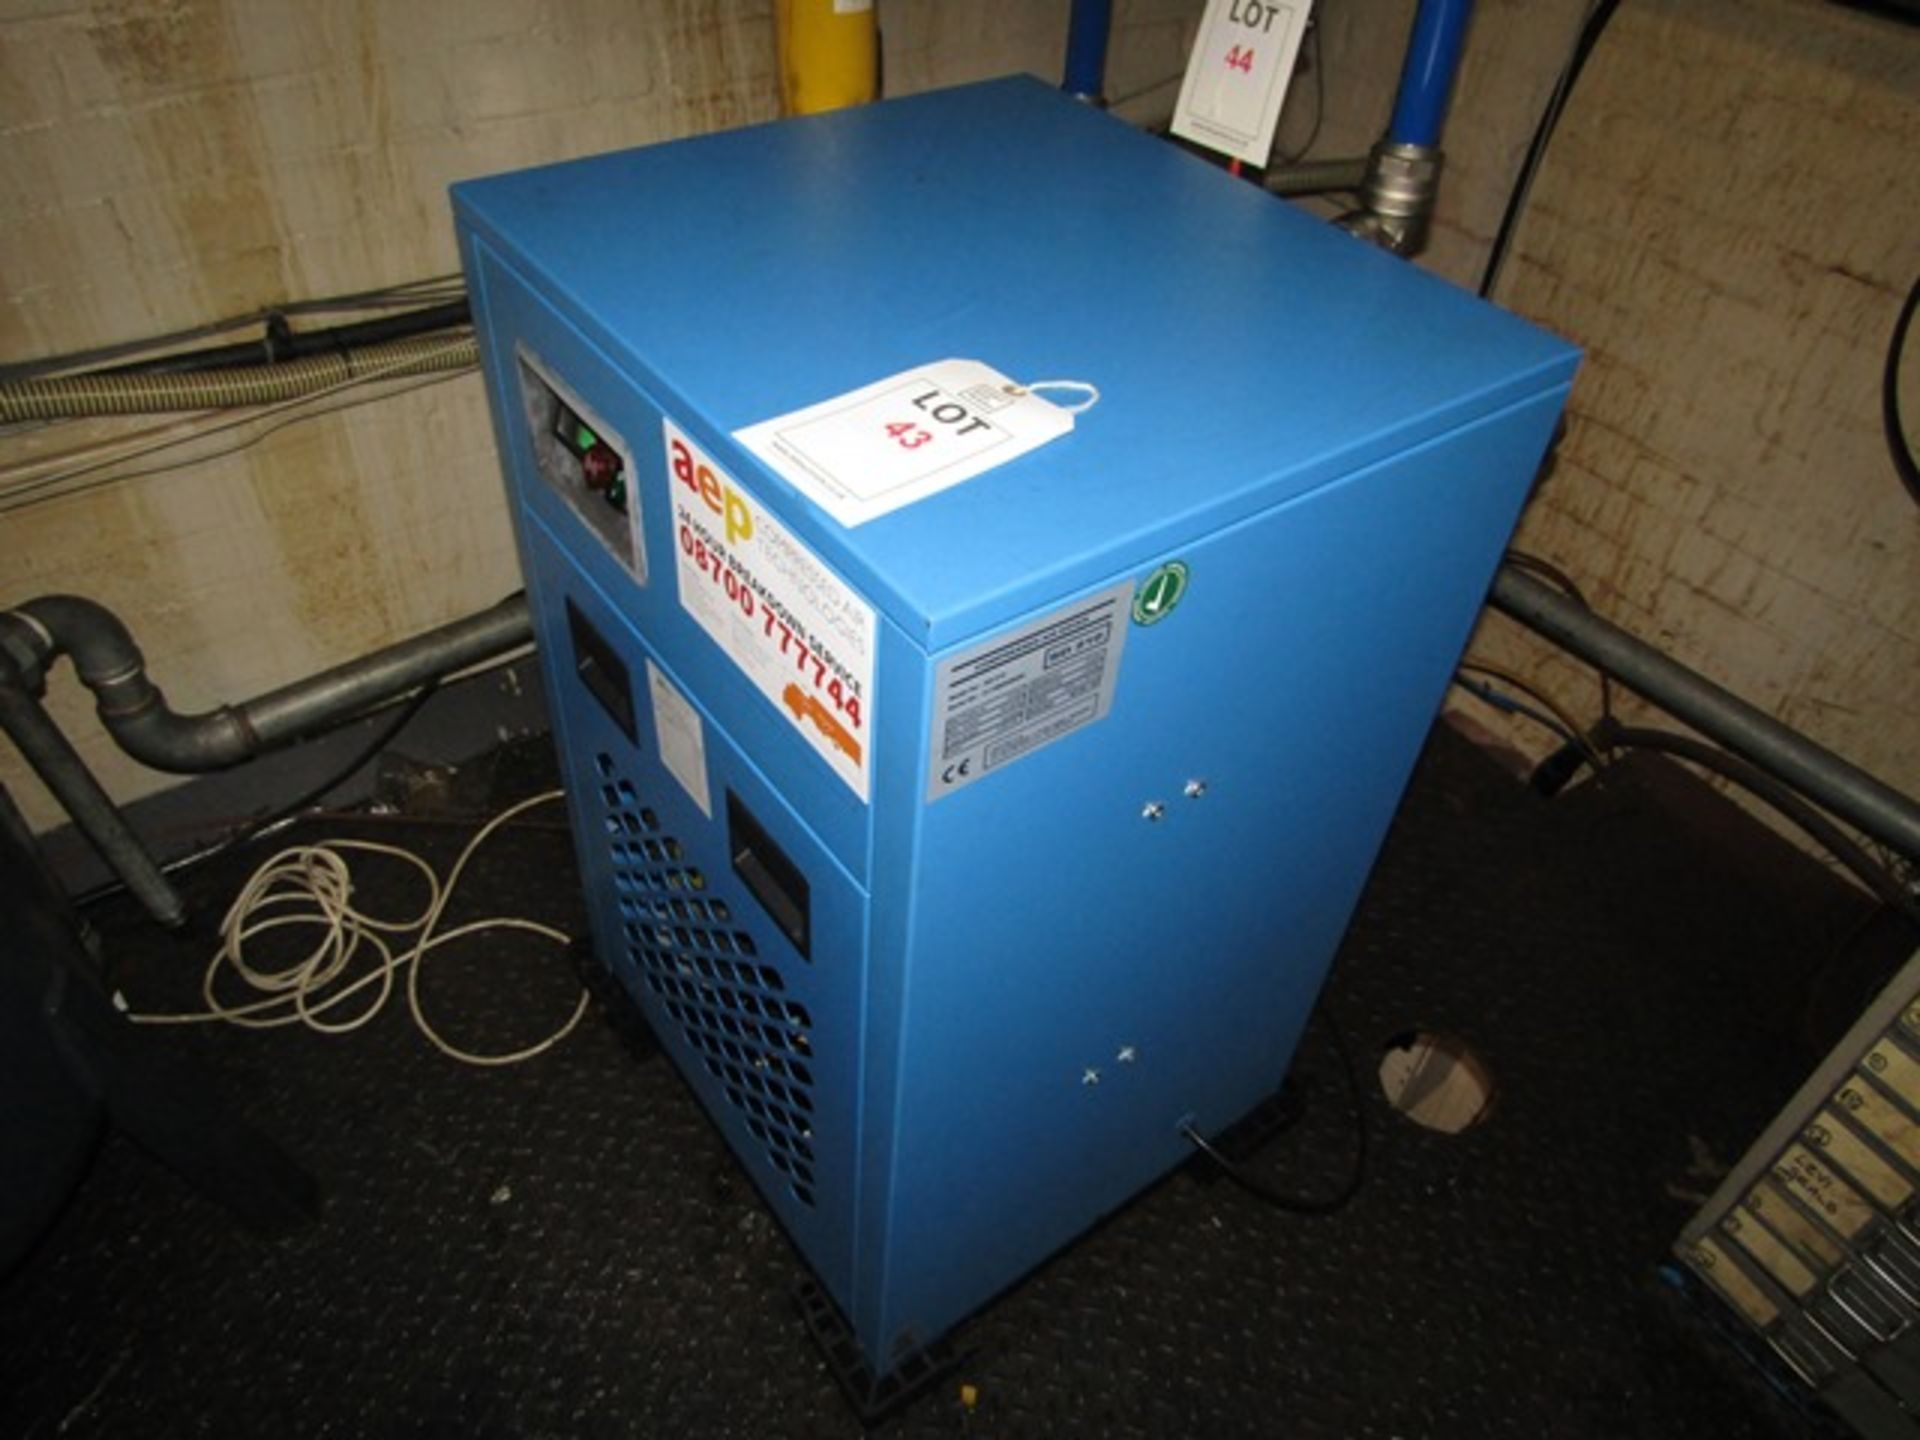 Drytec SD210 compressed air dryer, serial no: 2115MA08436. (Please note: A work Method Statement and